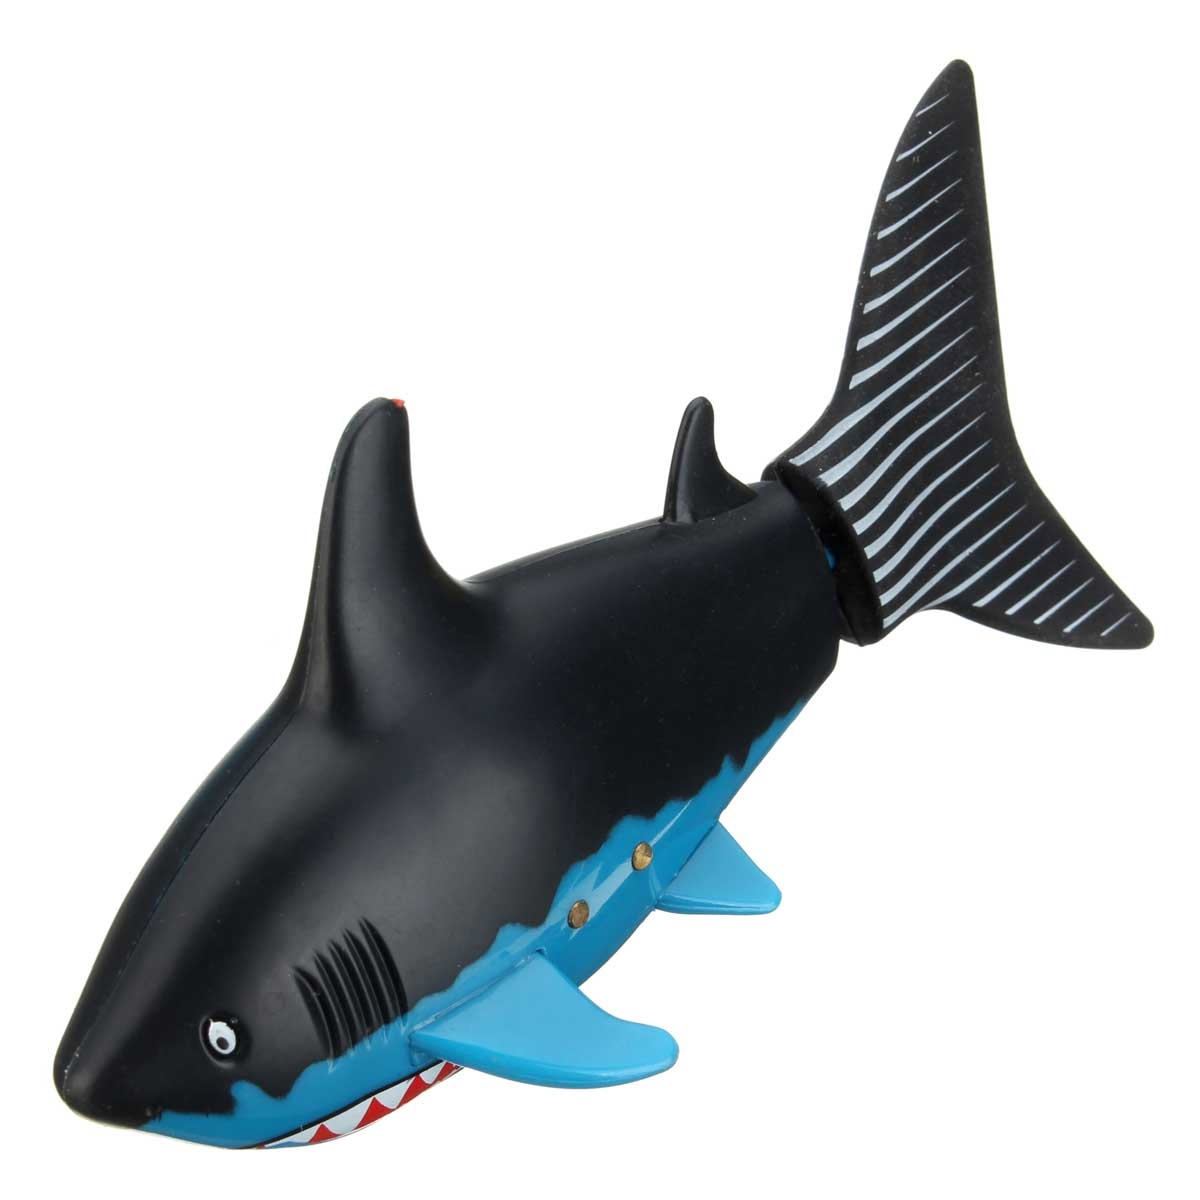 Radio Rc Mini Electrical Small Shark-Shaped Water Toys With Transmit